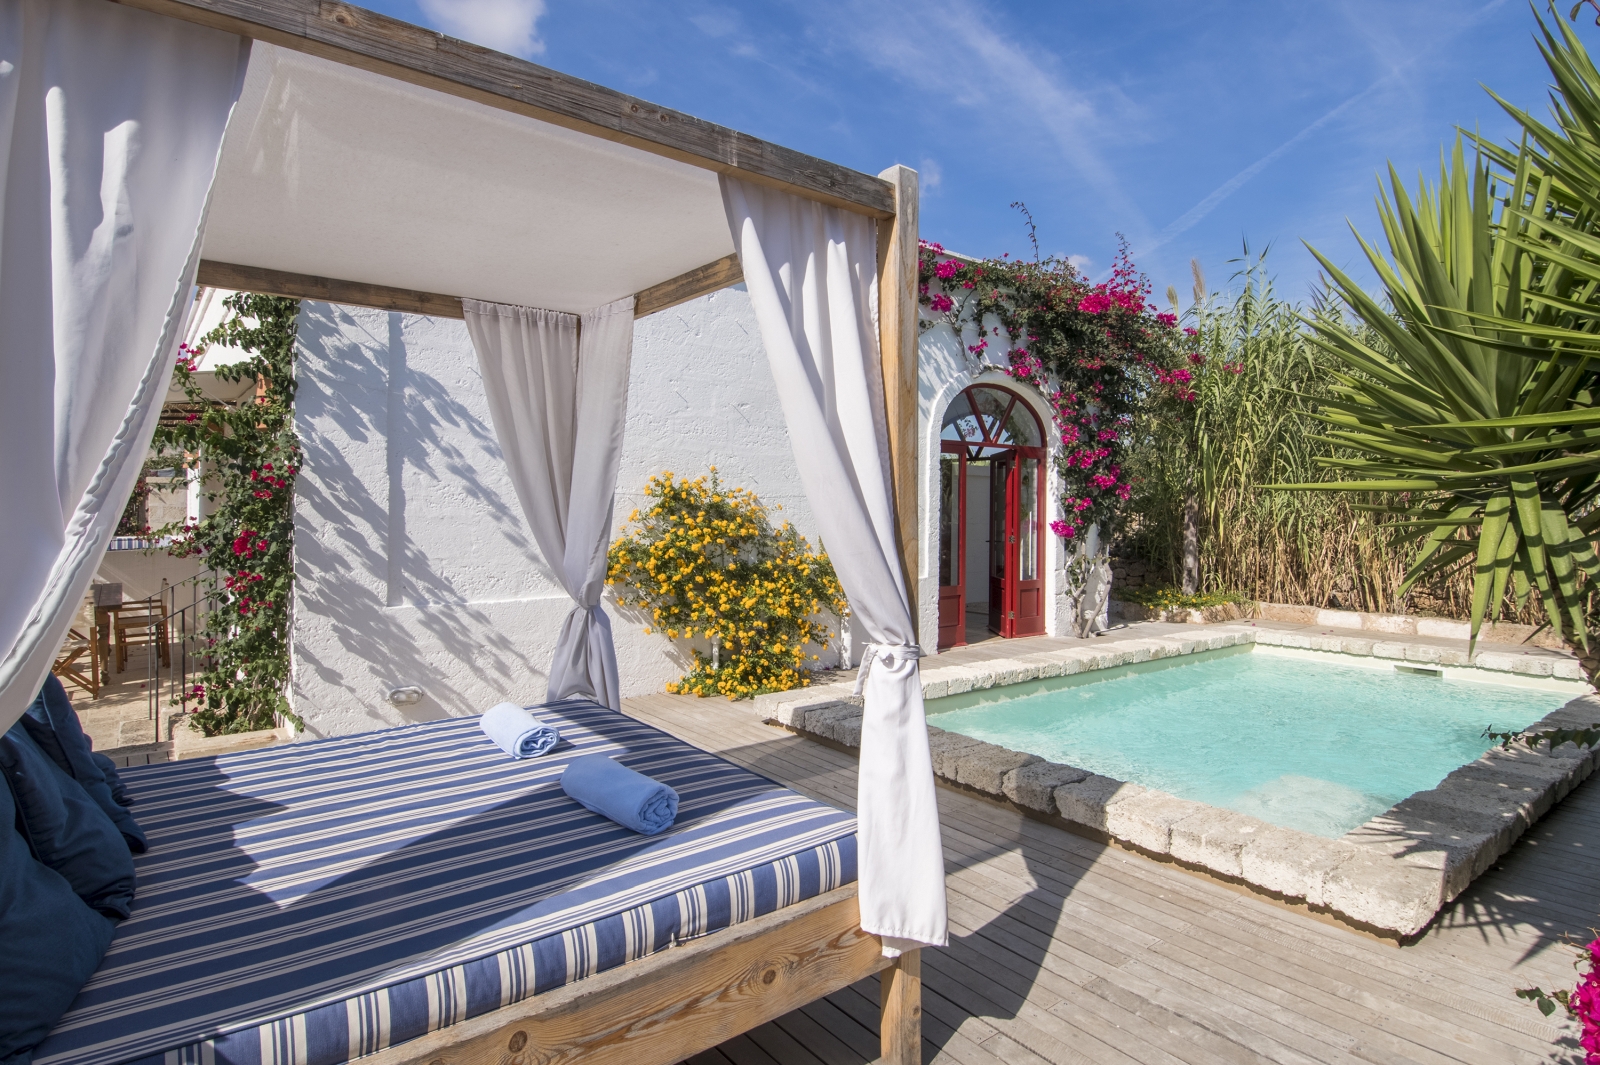 Private pool and pool cabana of an Olive Suite at luxury hotel Masseria Torre Coccaro in Italy